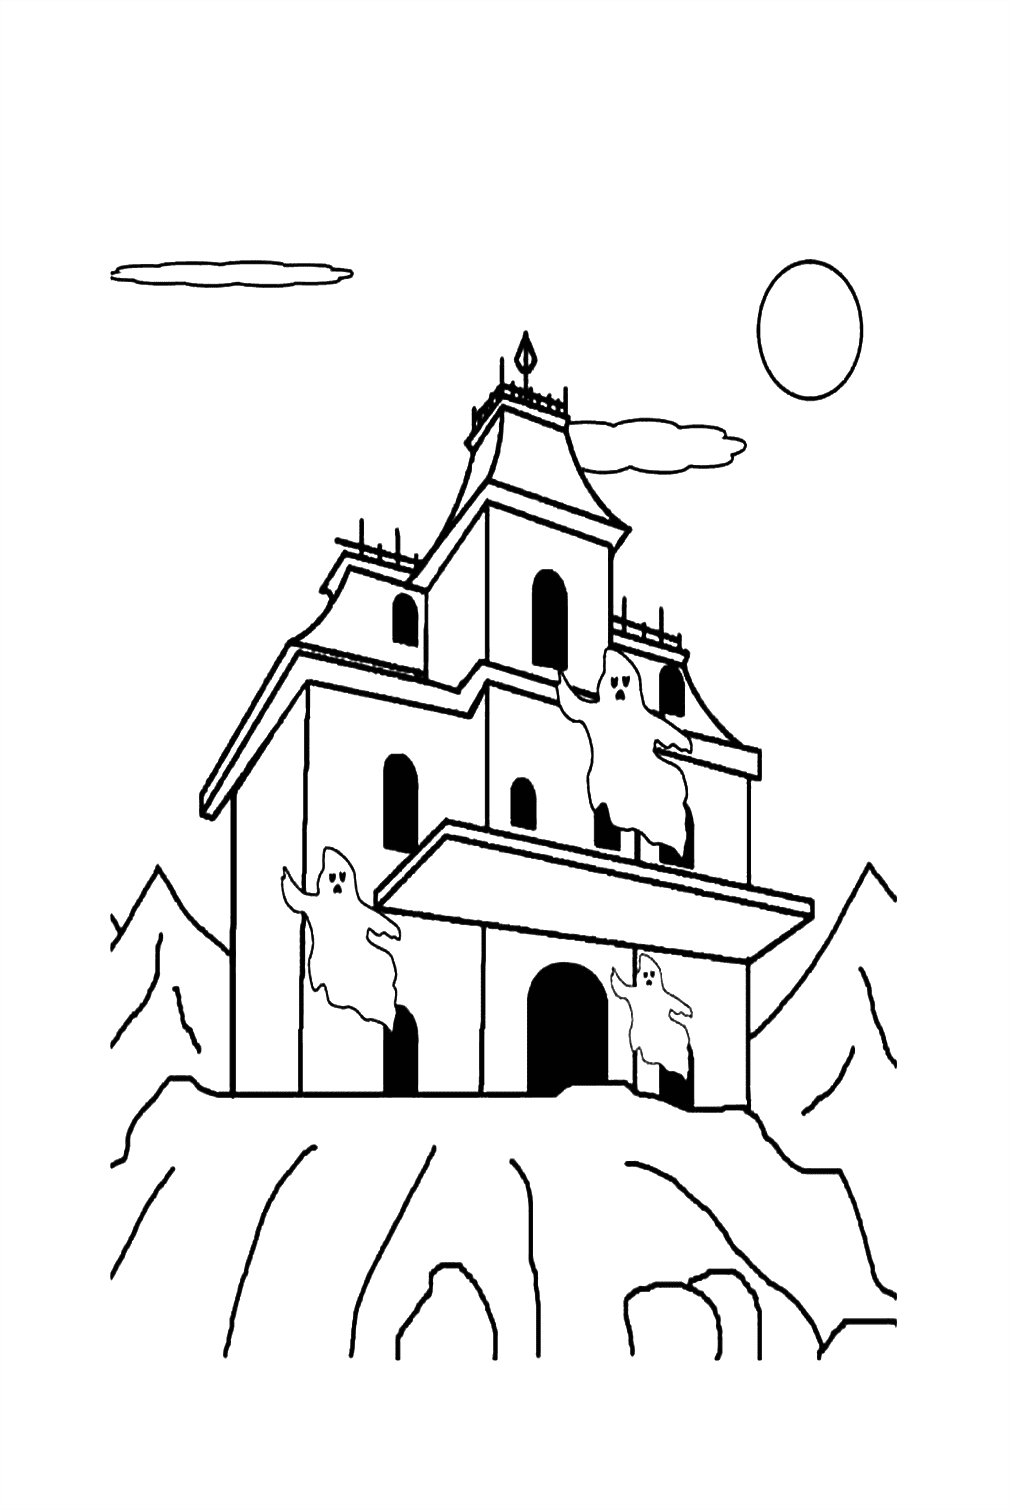 Ghosts Are Warning You In Haunted House Coloring Pages